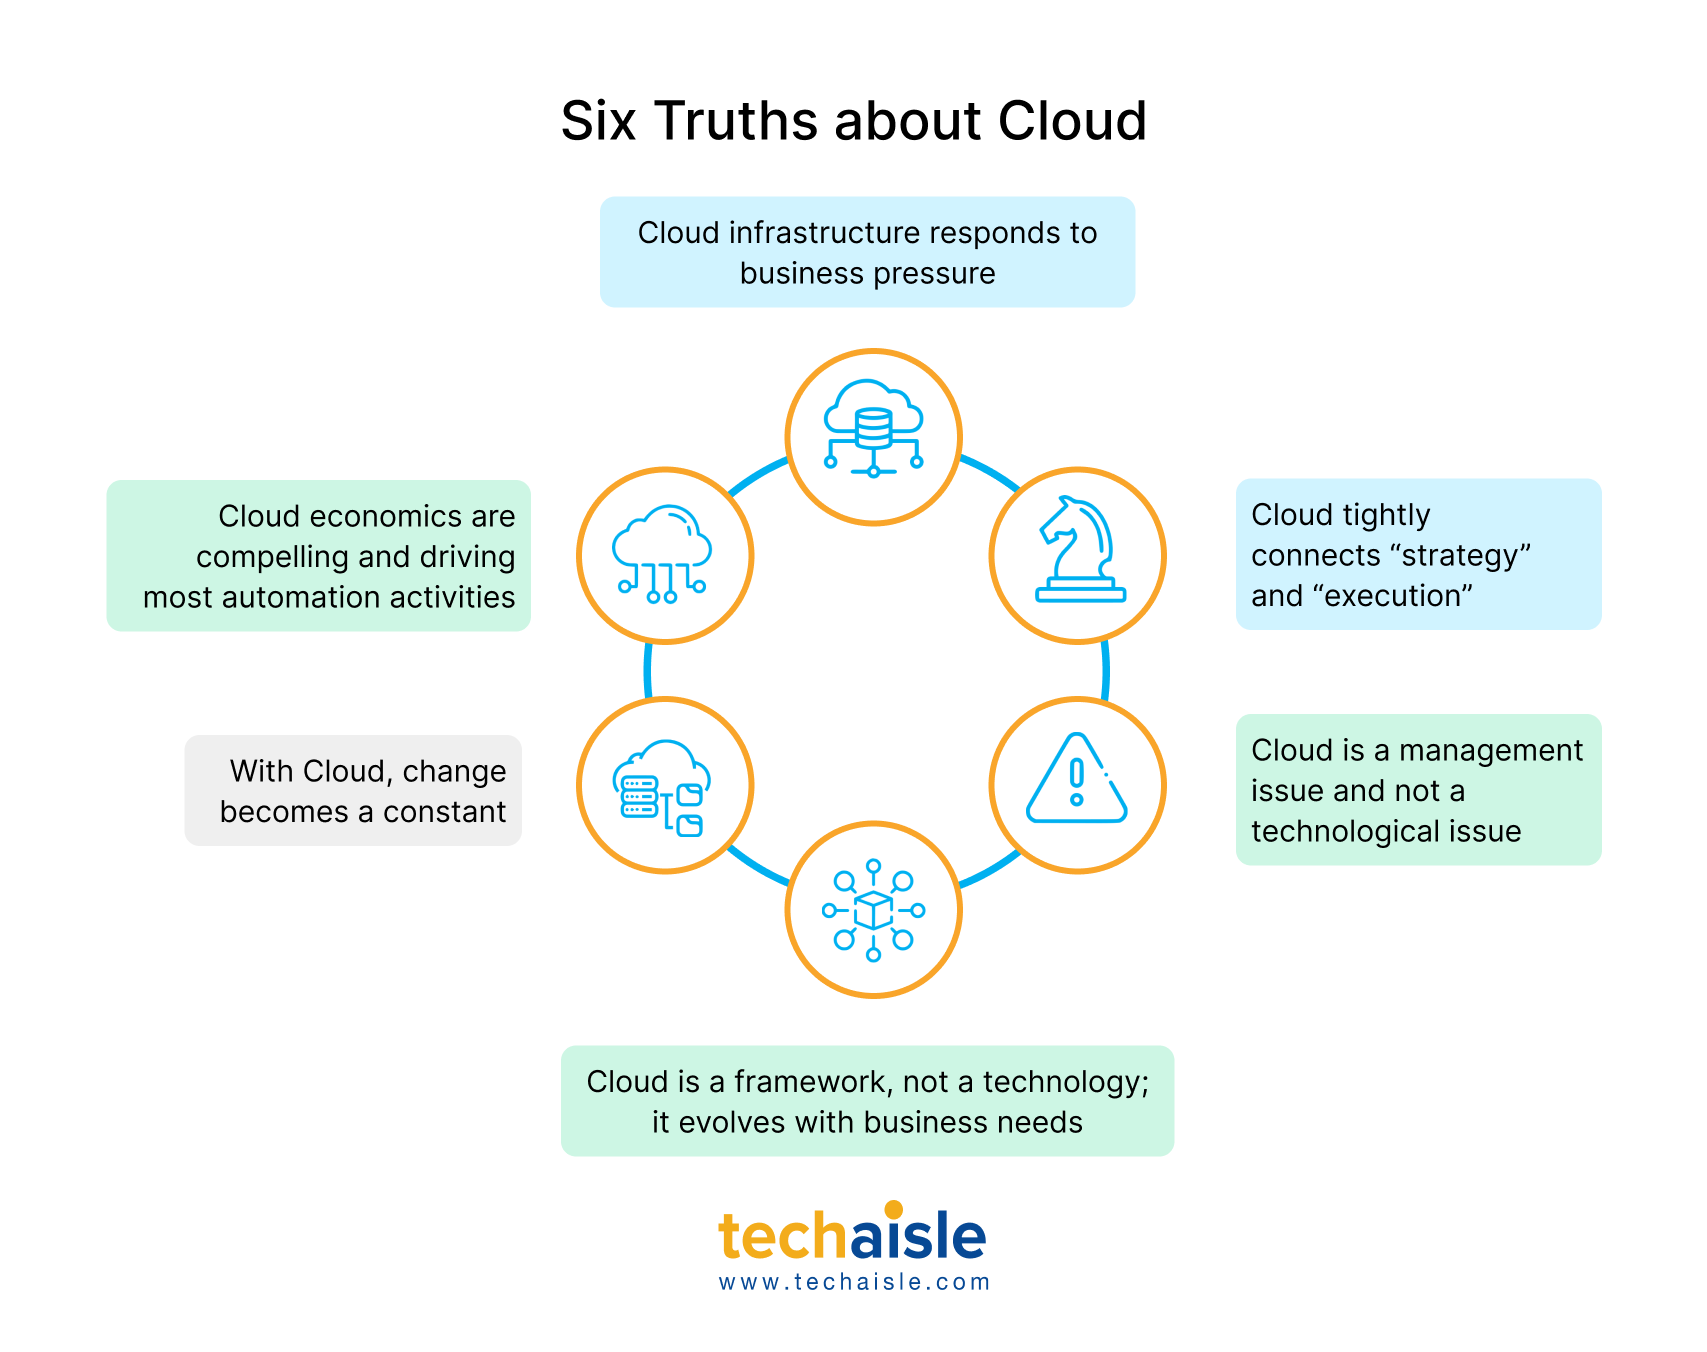 Techaisle study reveals that the Cloud is closing the gap between strategy and execution for SMBs and Midmarket firms - Techaisle Blog - Techaisle - Global SMB, Midmarket and Channel Partner Market Research Organization techaisle-six-truths-cloud 